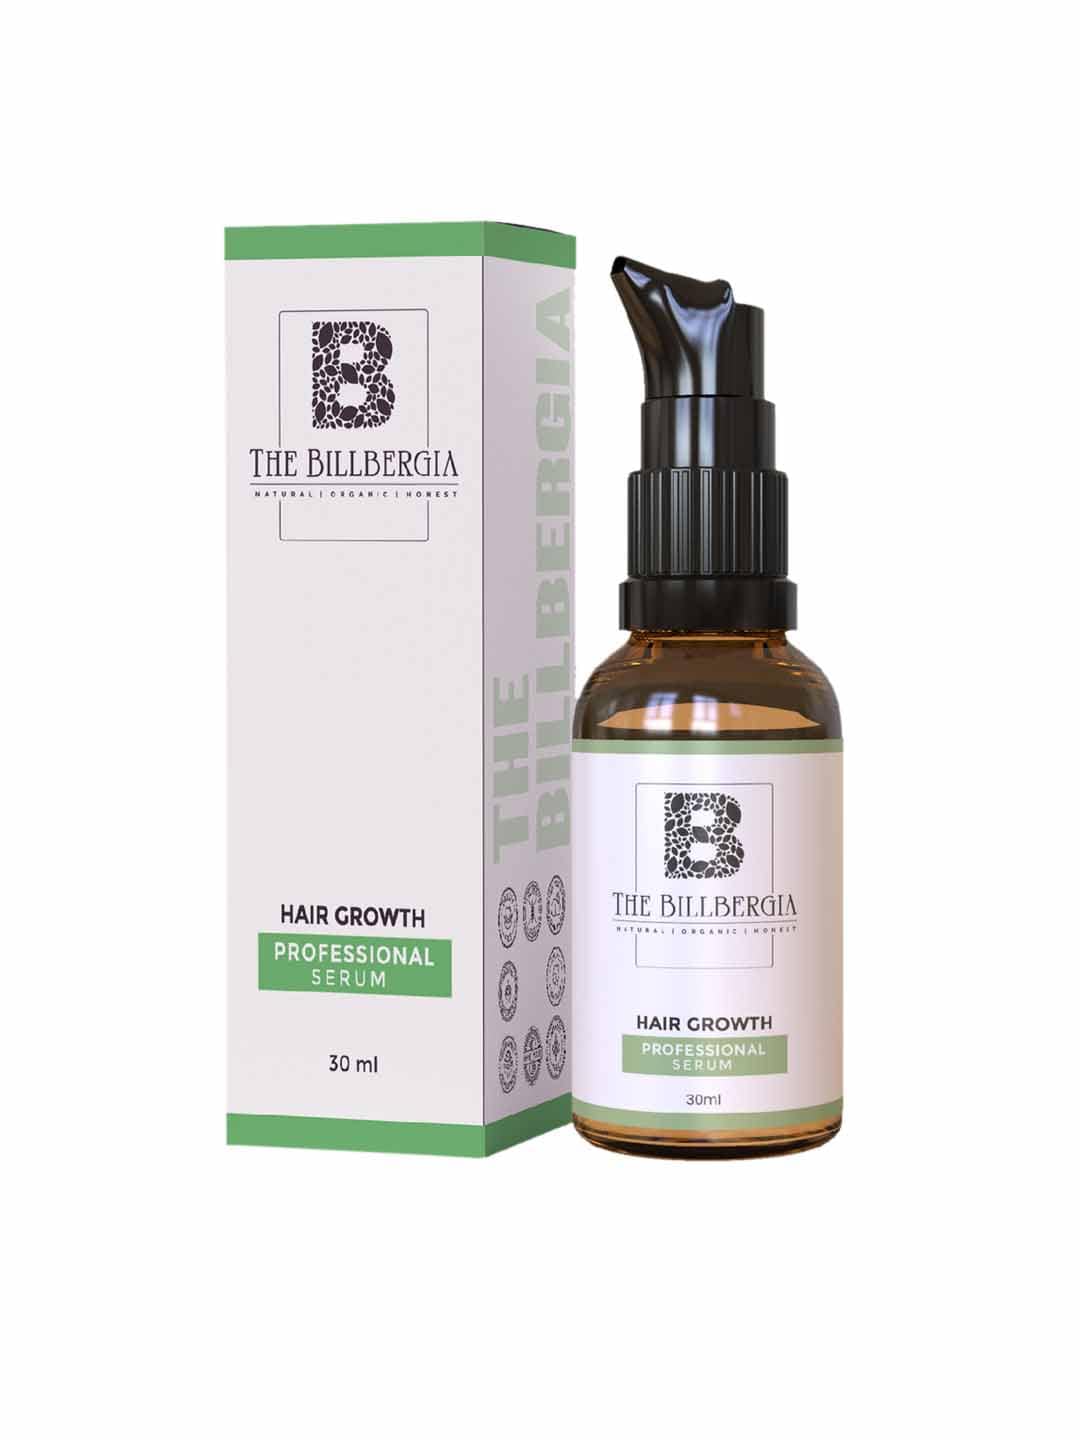 THE BILLBERGIA Hair Growth Professional Serum with Argan Oil30 ml Price in India